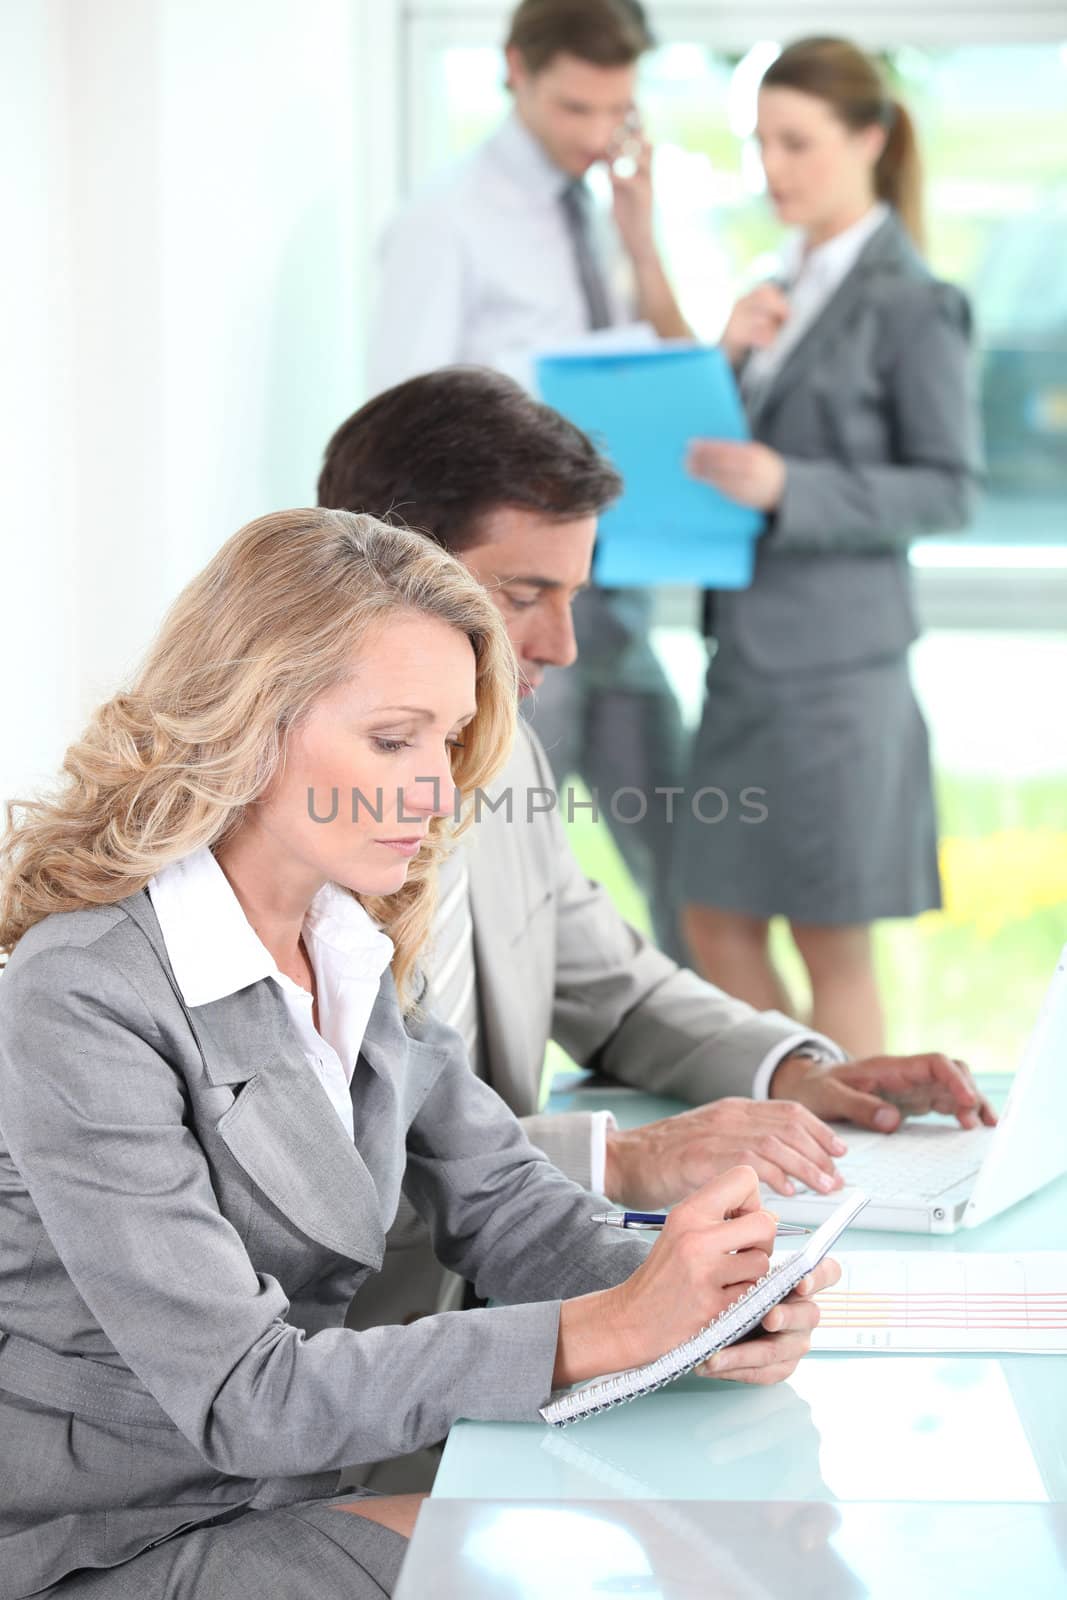 Woman writing in a notepad in an office environment